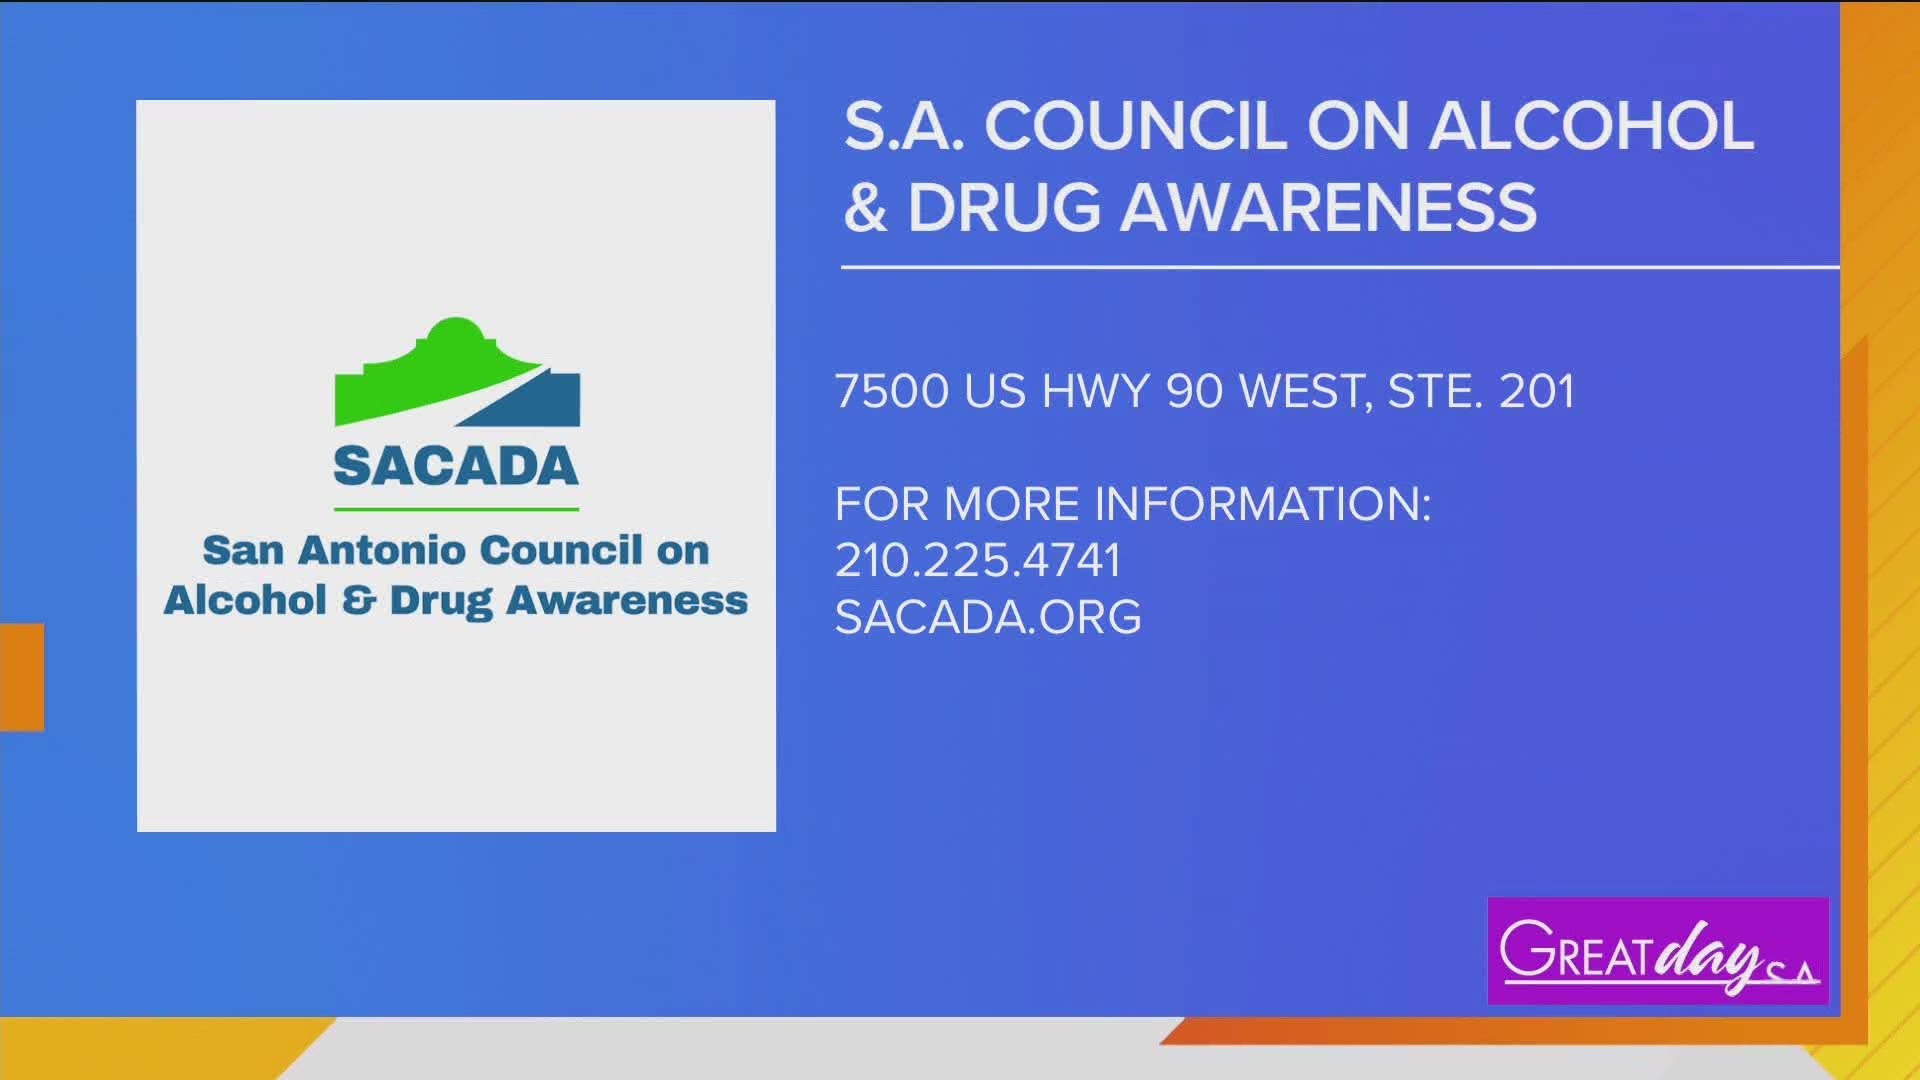 The San Antonio Council on Alcohol and Drug Awareness is reminding parents to start having conversations about substance abuse and addiction with their children.